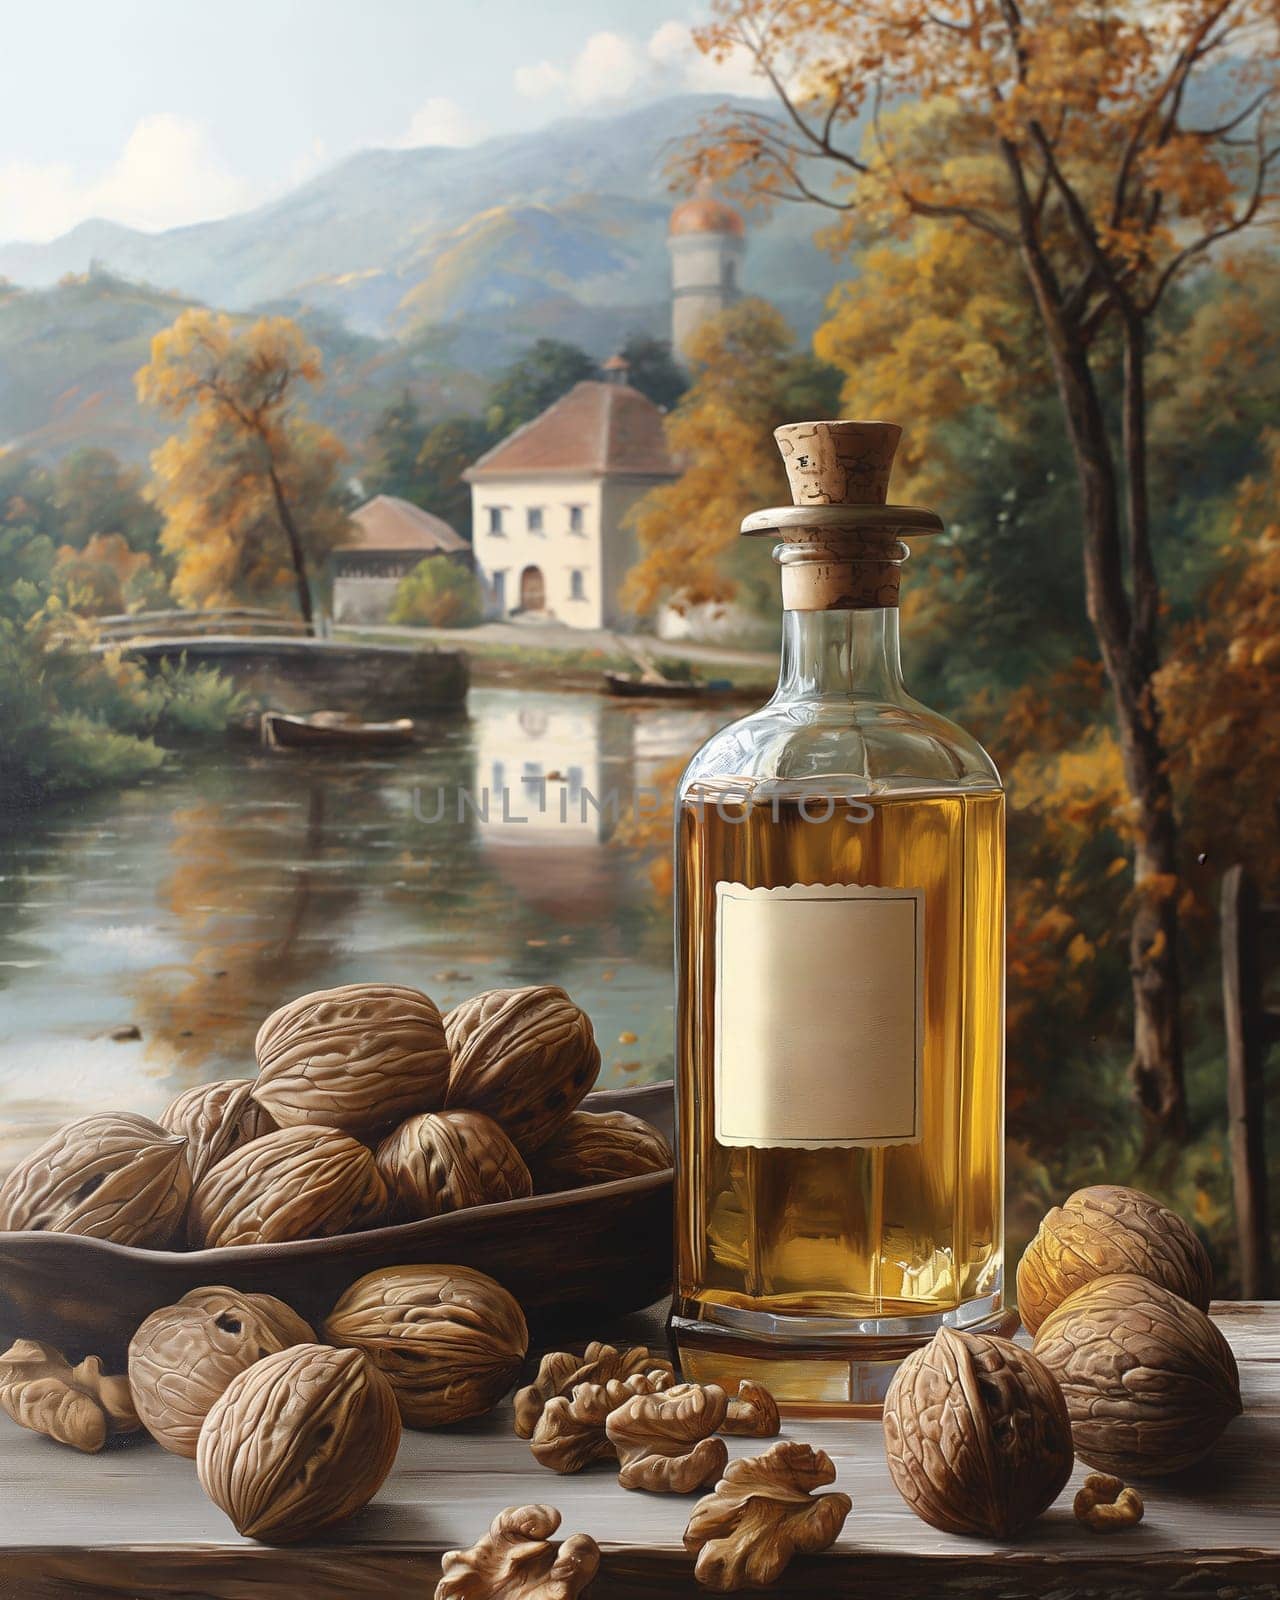 A bottle of oil and walnuts on a wooden table. Selective soft focus.